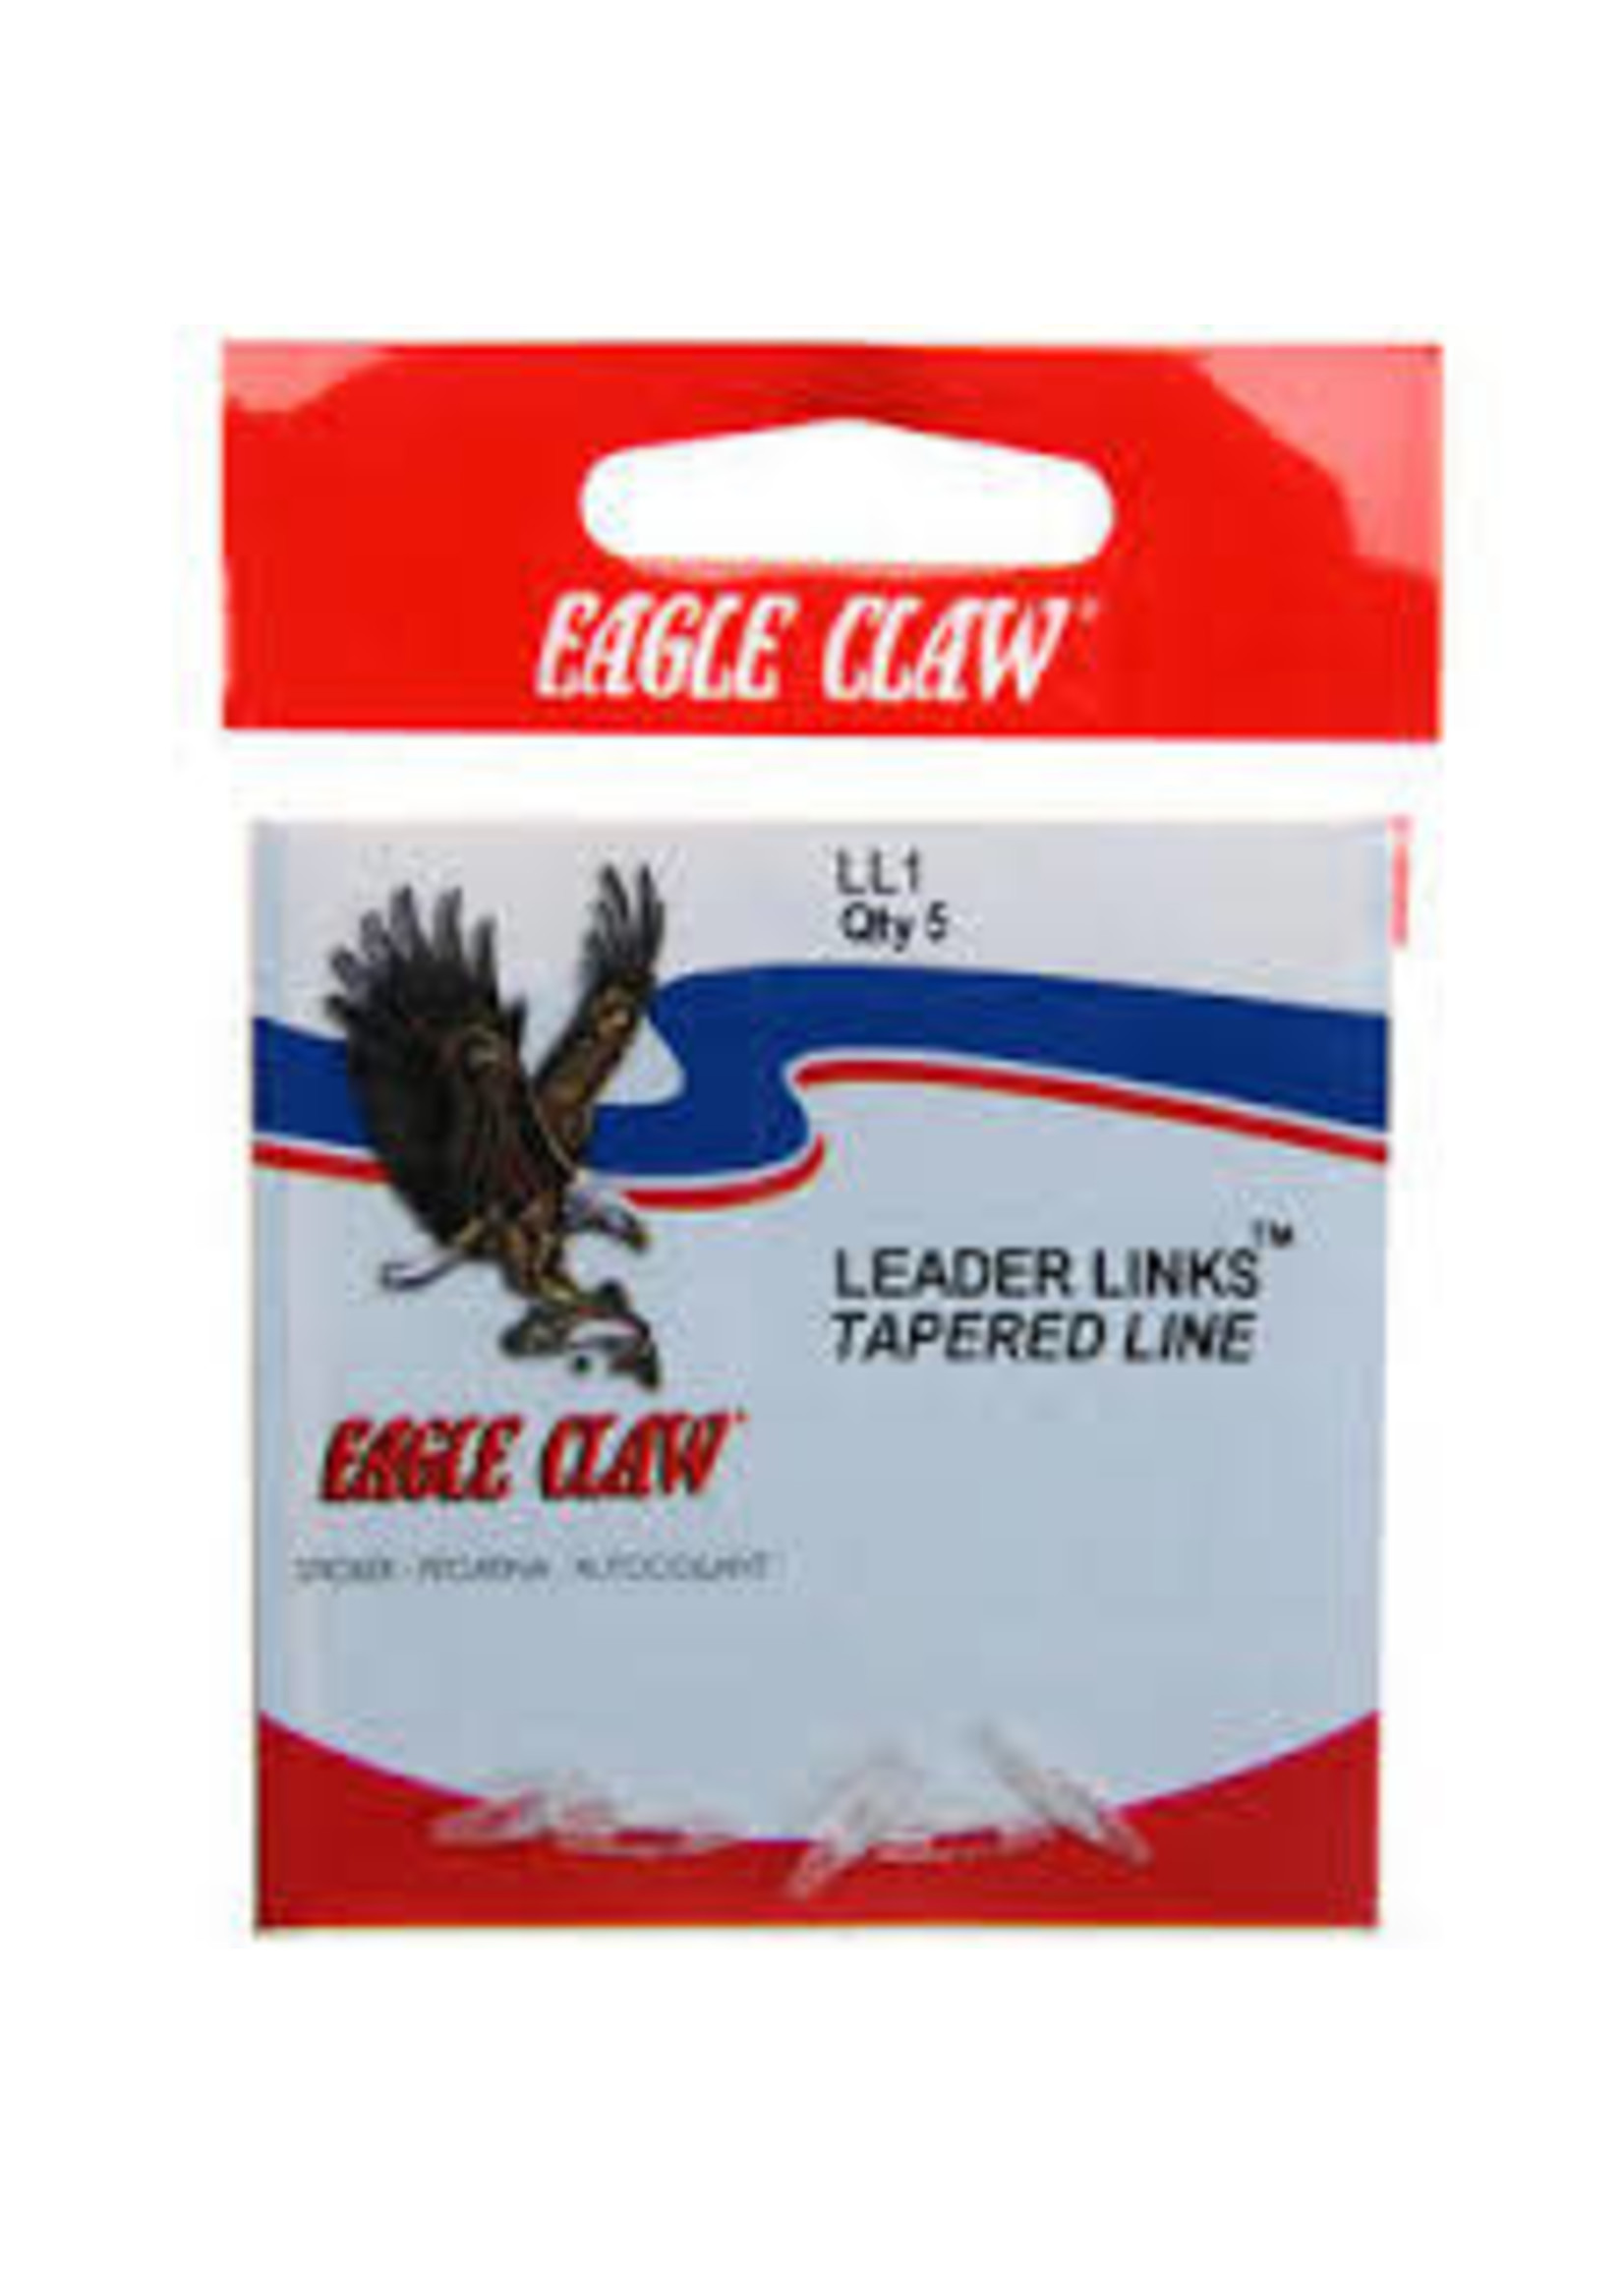 Eagle Claw EAGLE LEADER LINKS TAPERED LINE LLF 5PK - Cheap Seats